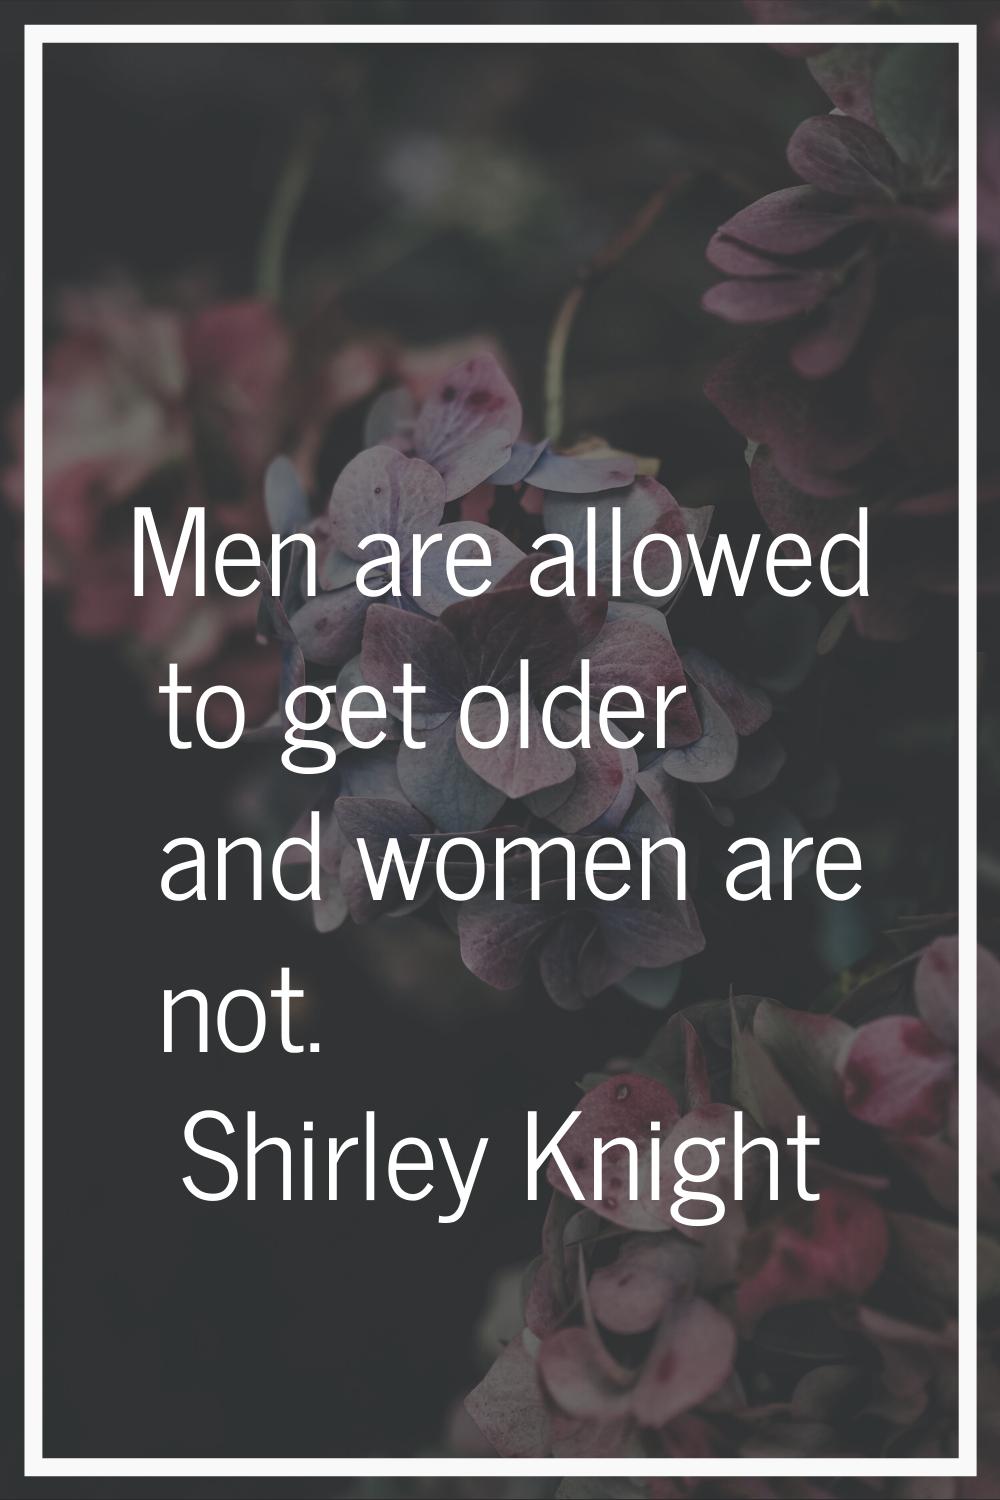 Men are allowed to get older and women are not.